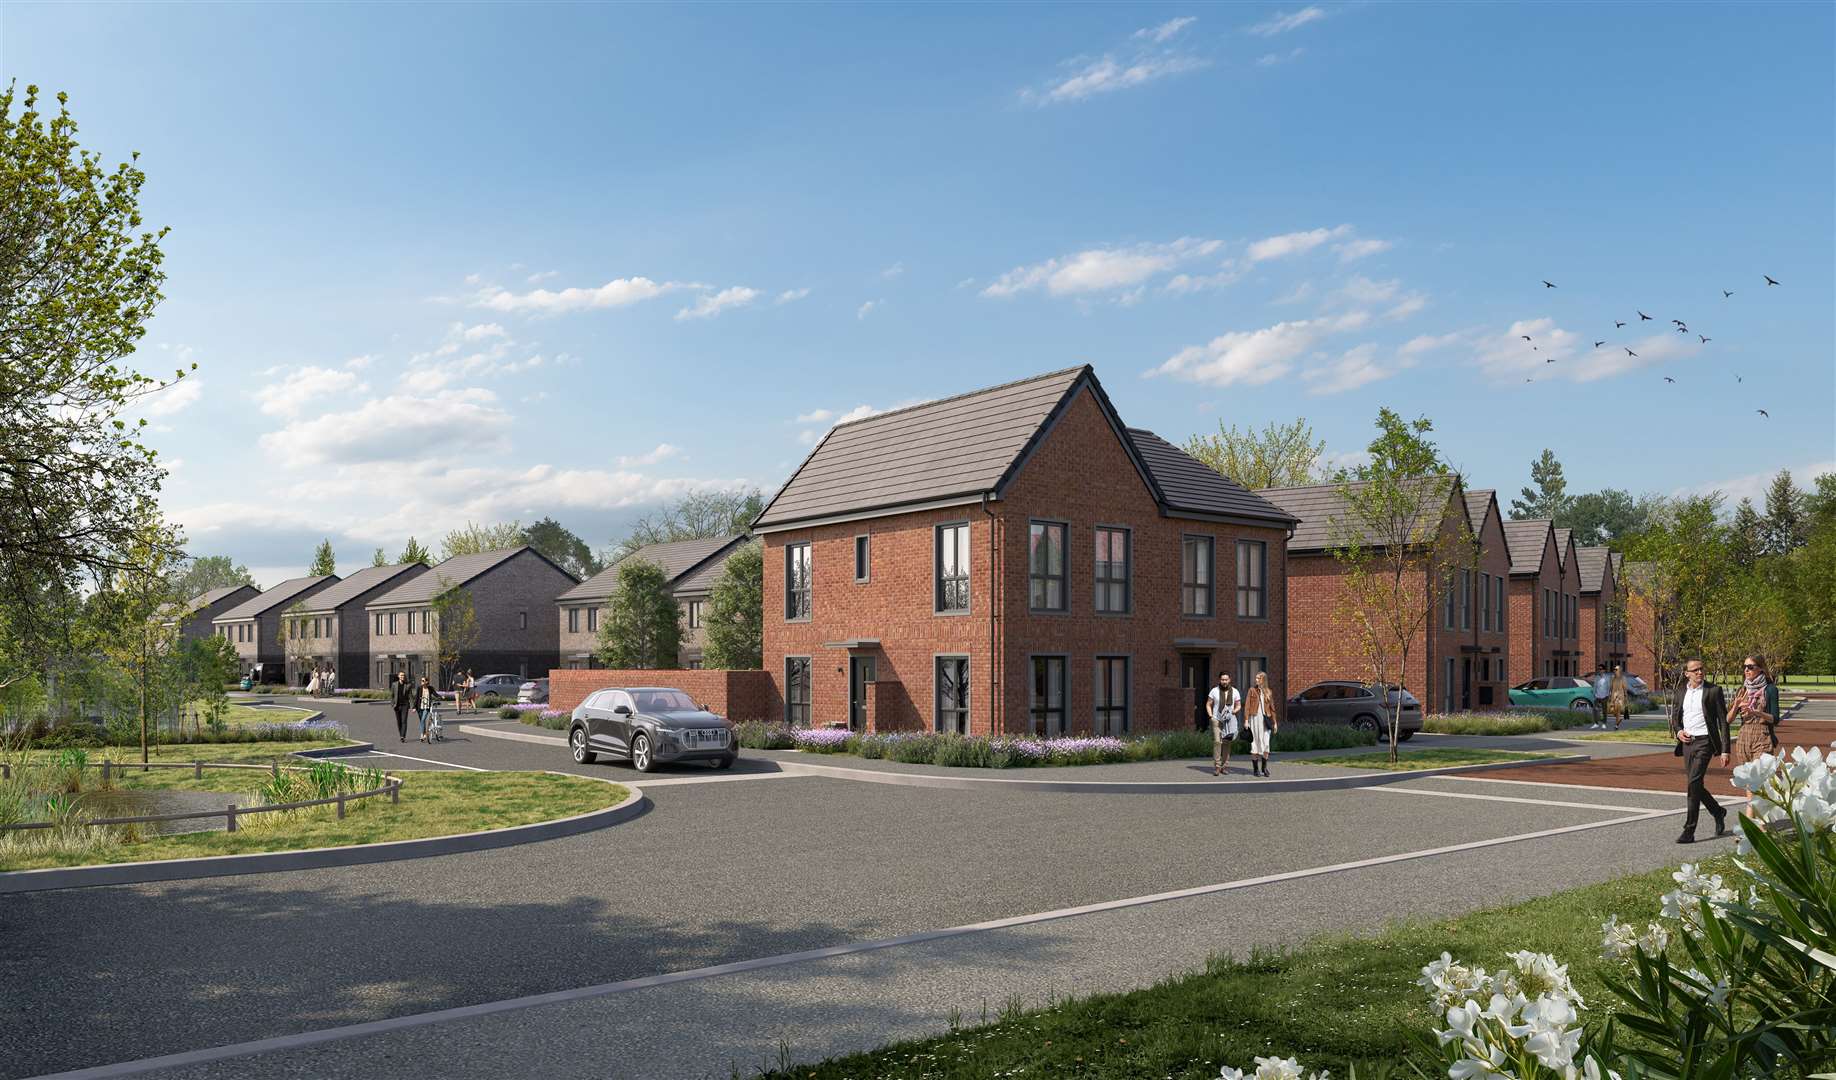 These new homes are planned for Staplehurst by Ilke Homes